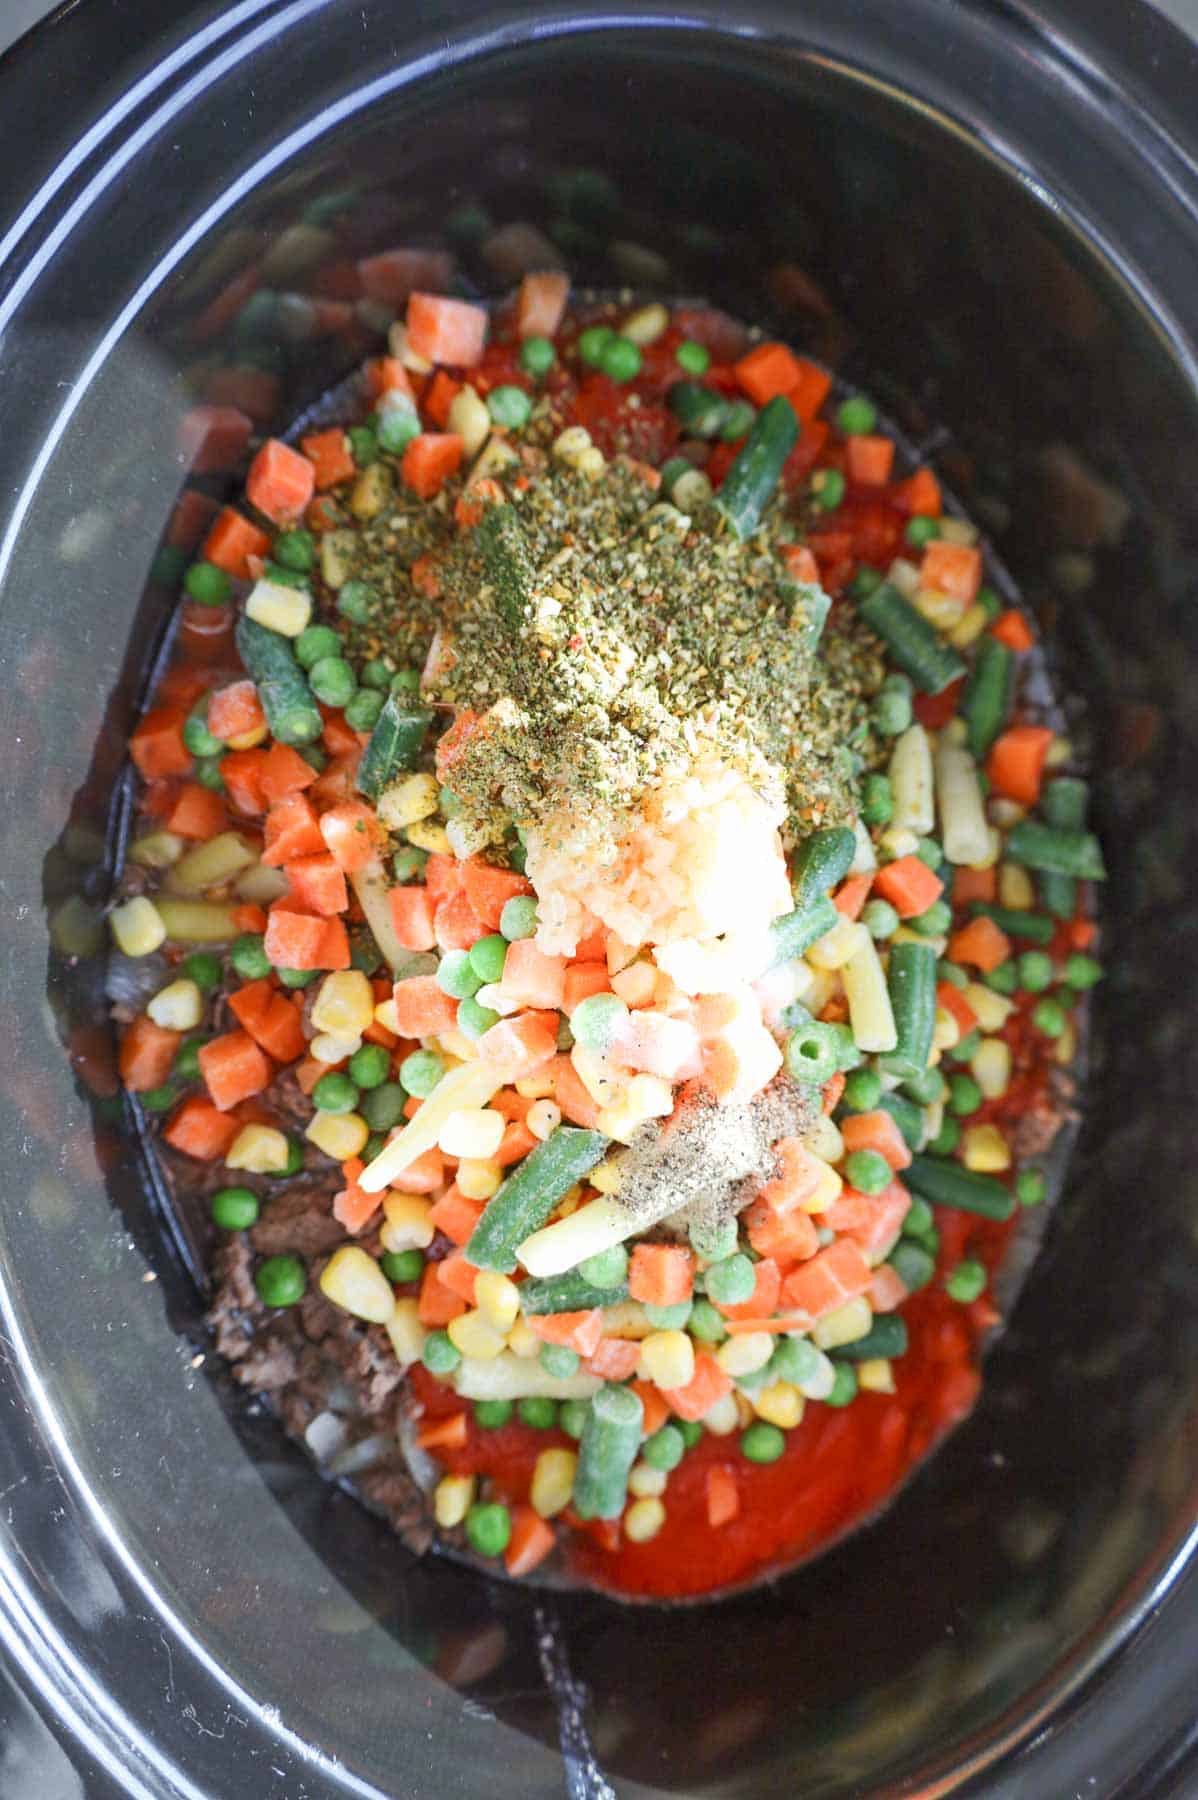 minced garlic and seasonings on top of frozen mixed veggies in a crock pot